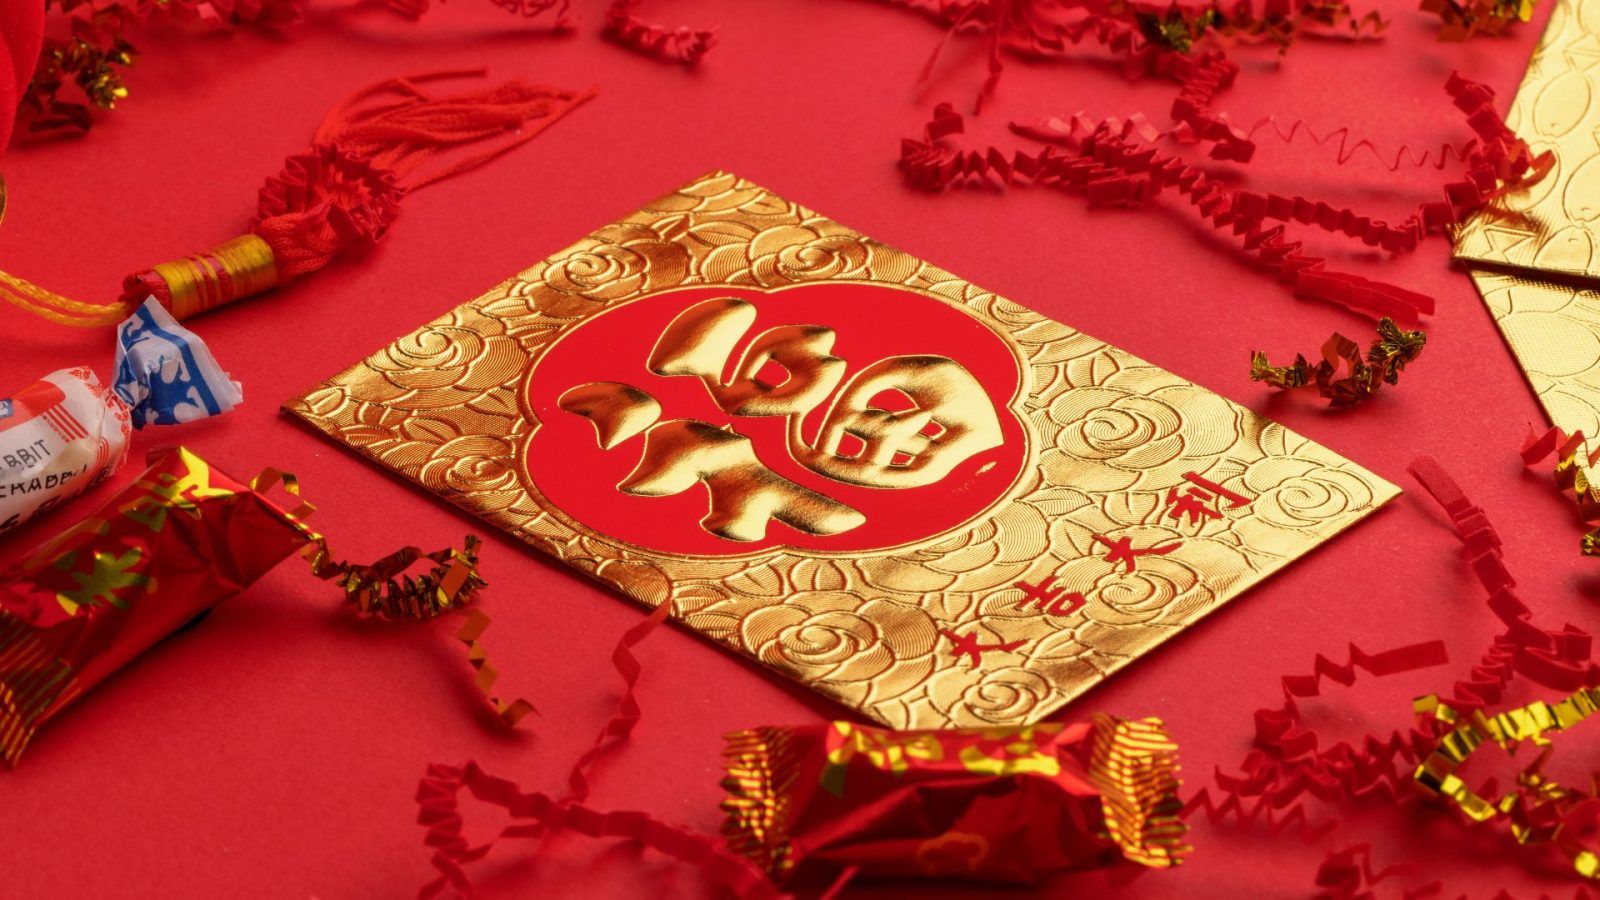 Year of the Rabbit Red Envelope Gold Lucky Money Money 